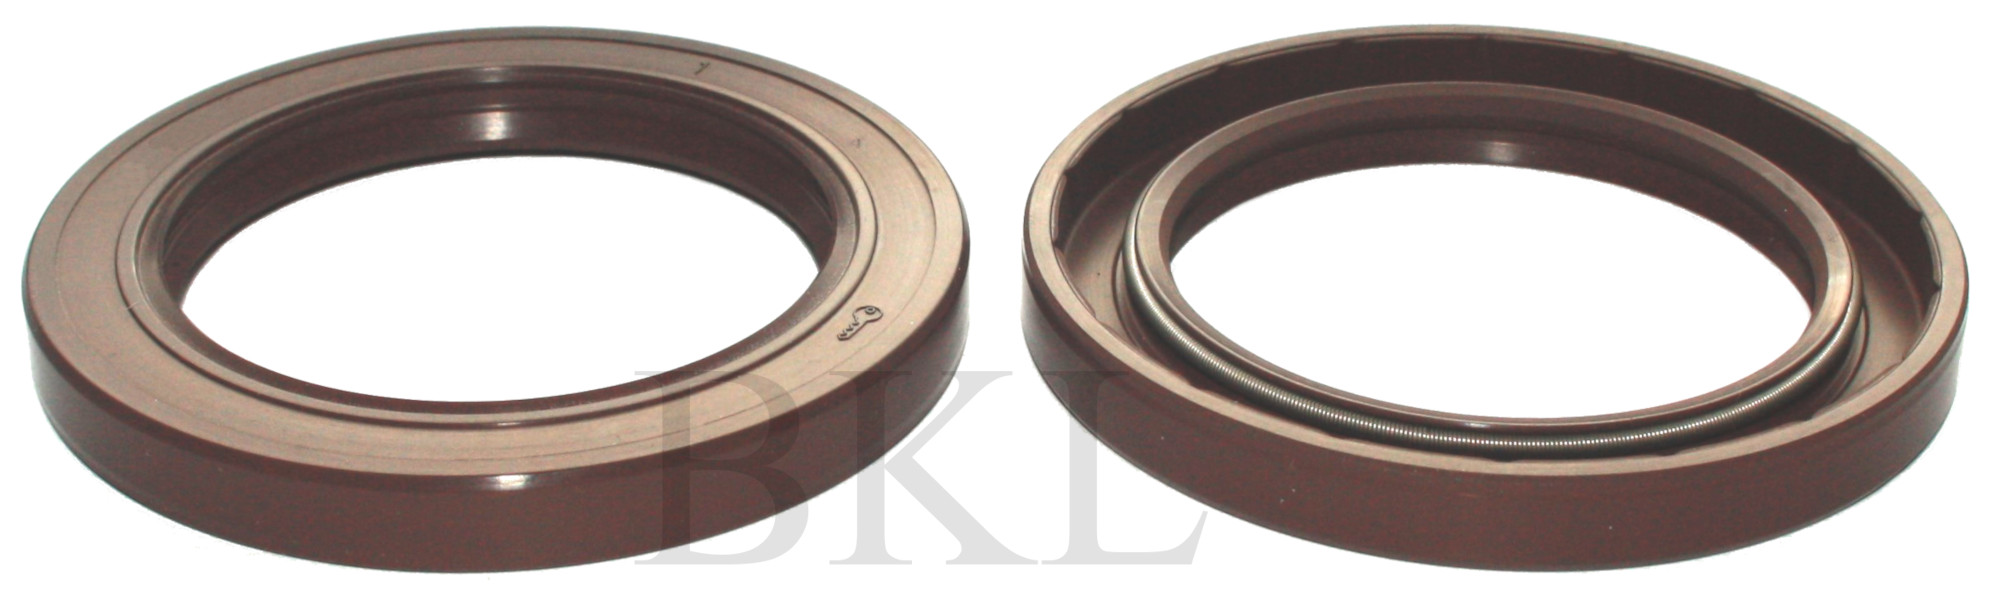 30x62x10mm R23/TC Double Lip Viton Rotary Shaft Oil Seal with Garter Spring image 2